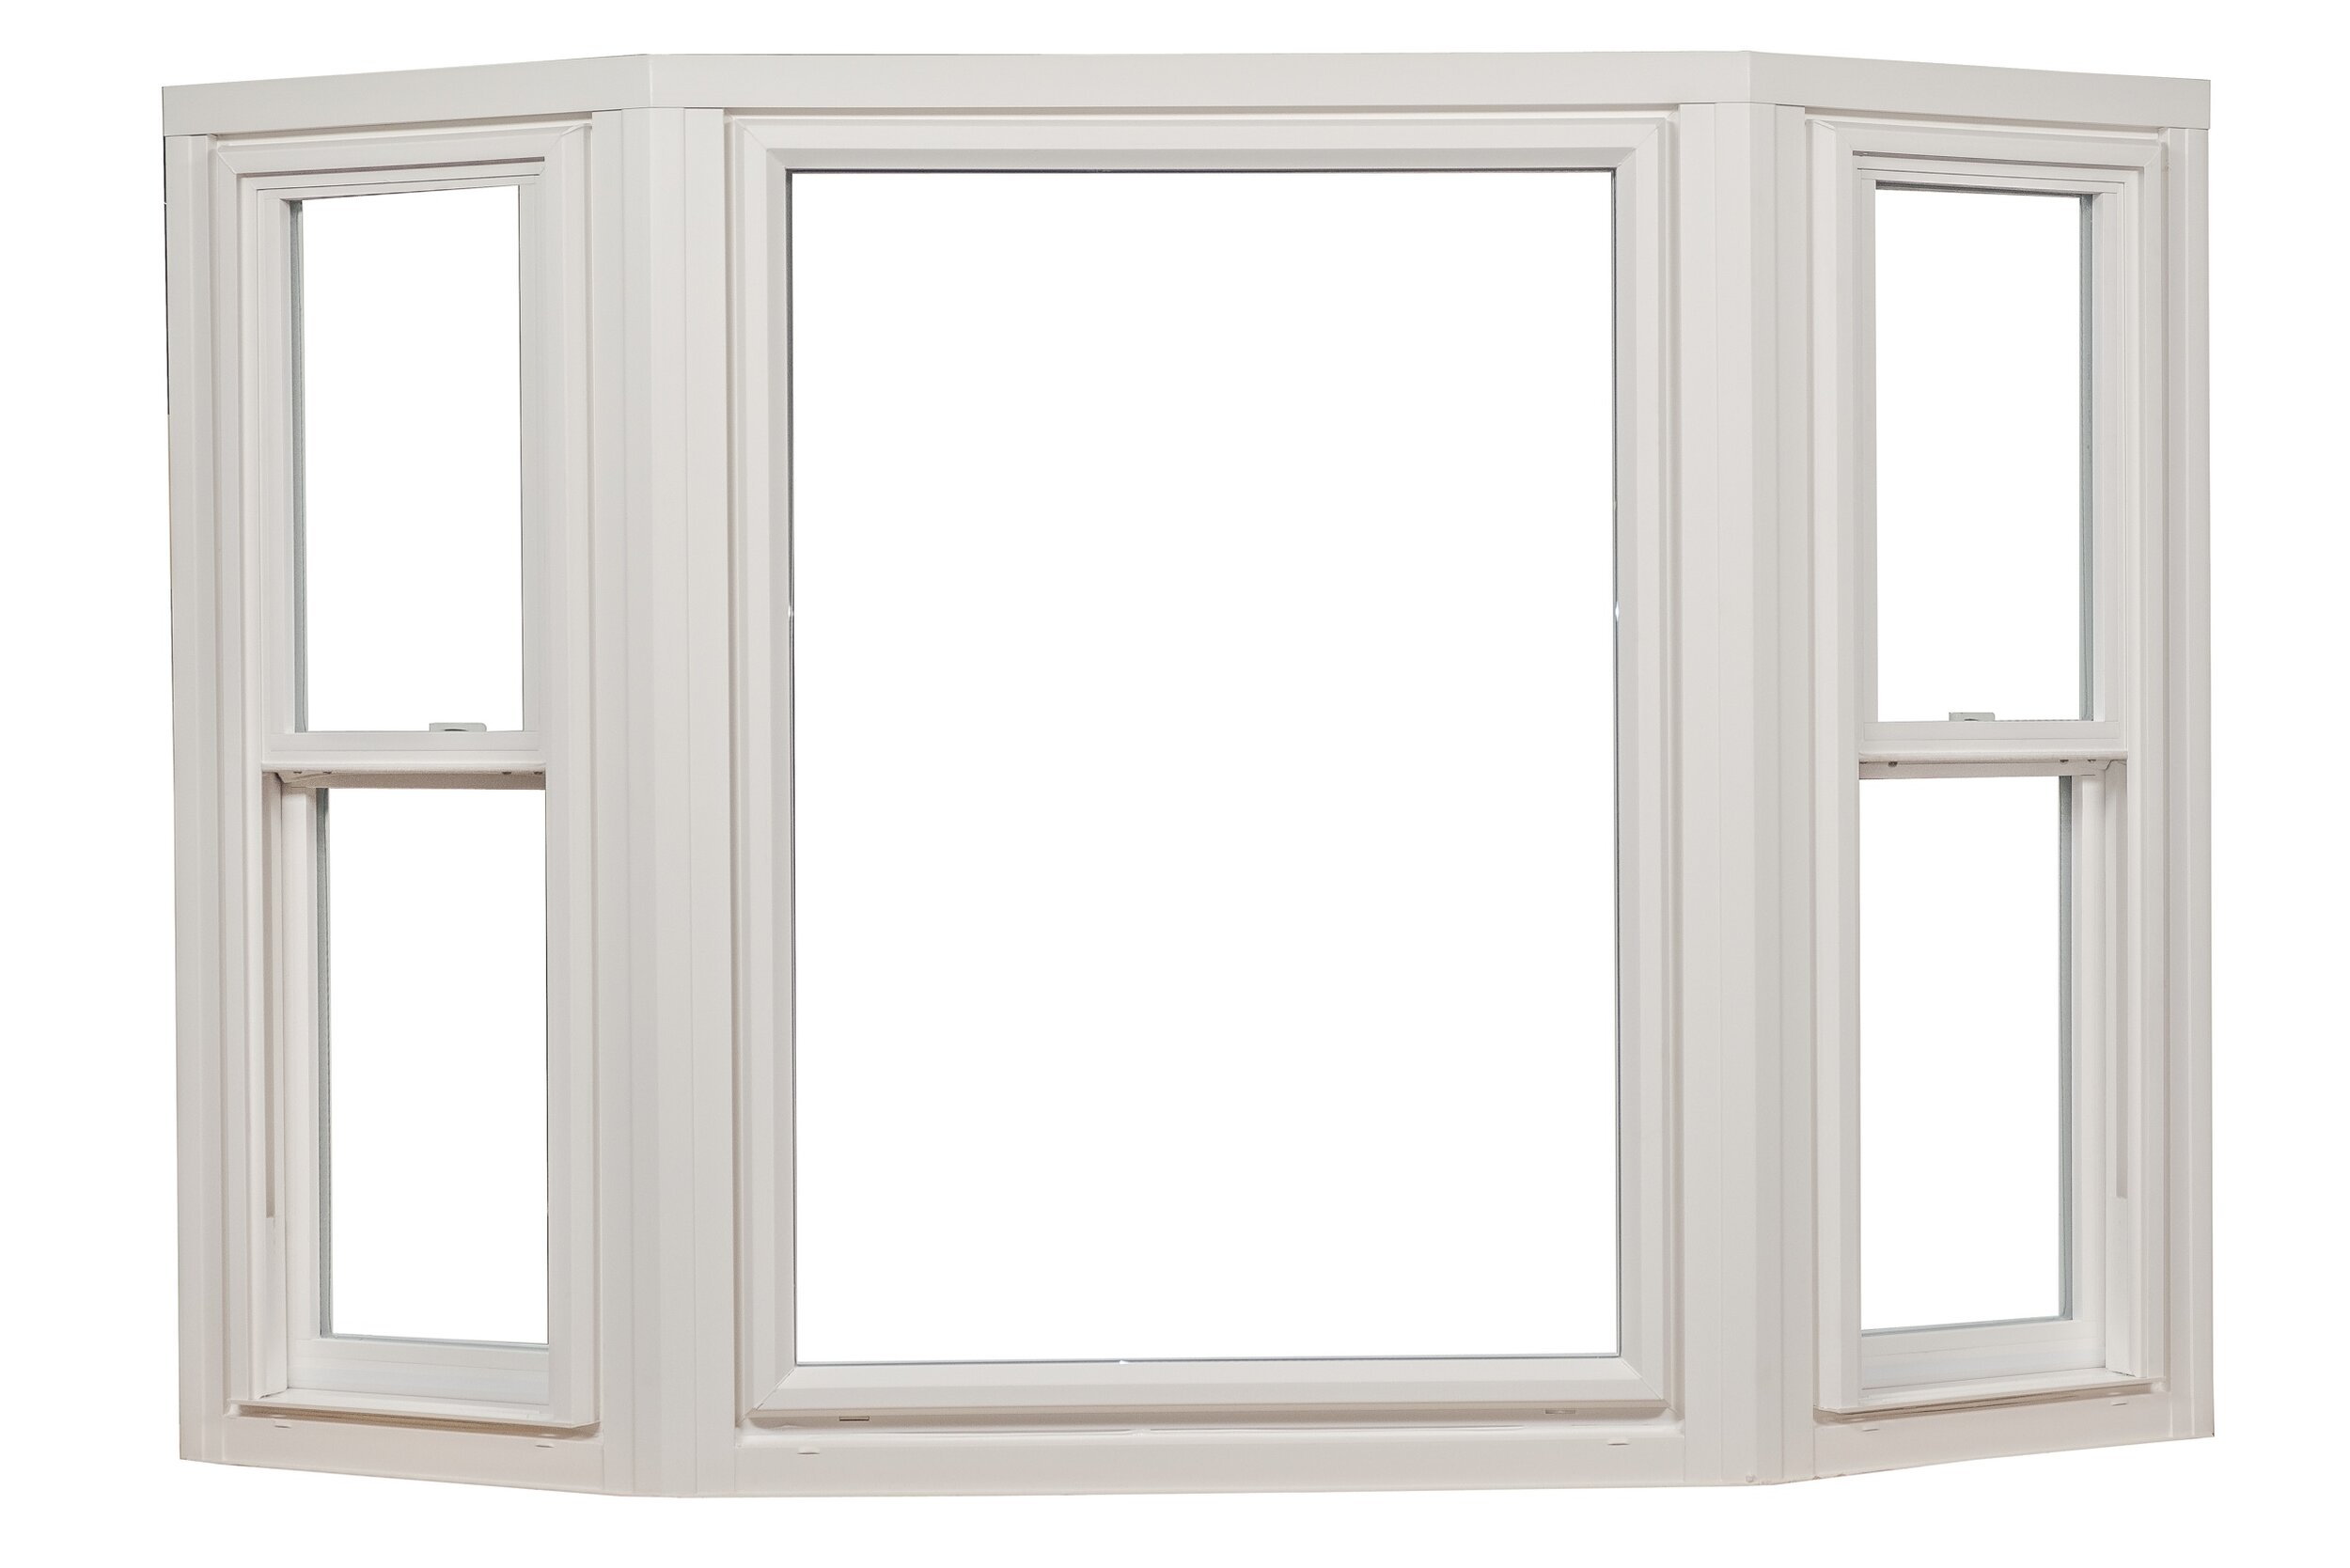 Mercury Excelum's exterior bay windows, with vinyl exterior capping and insulated seat board.